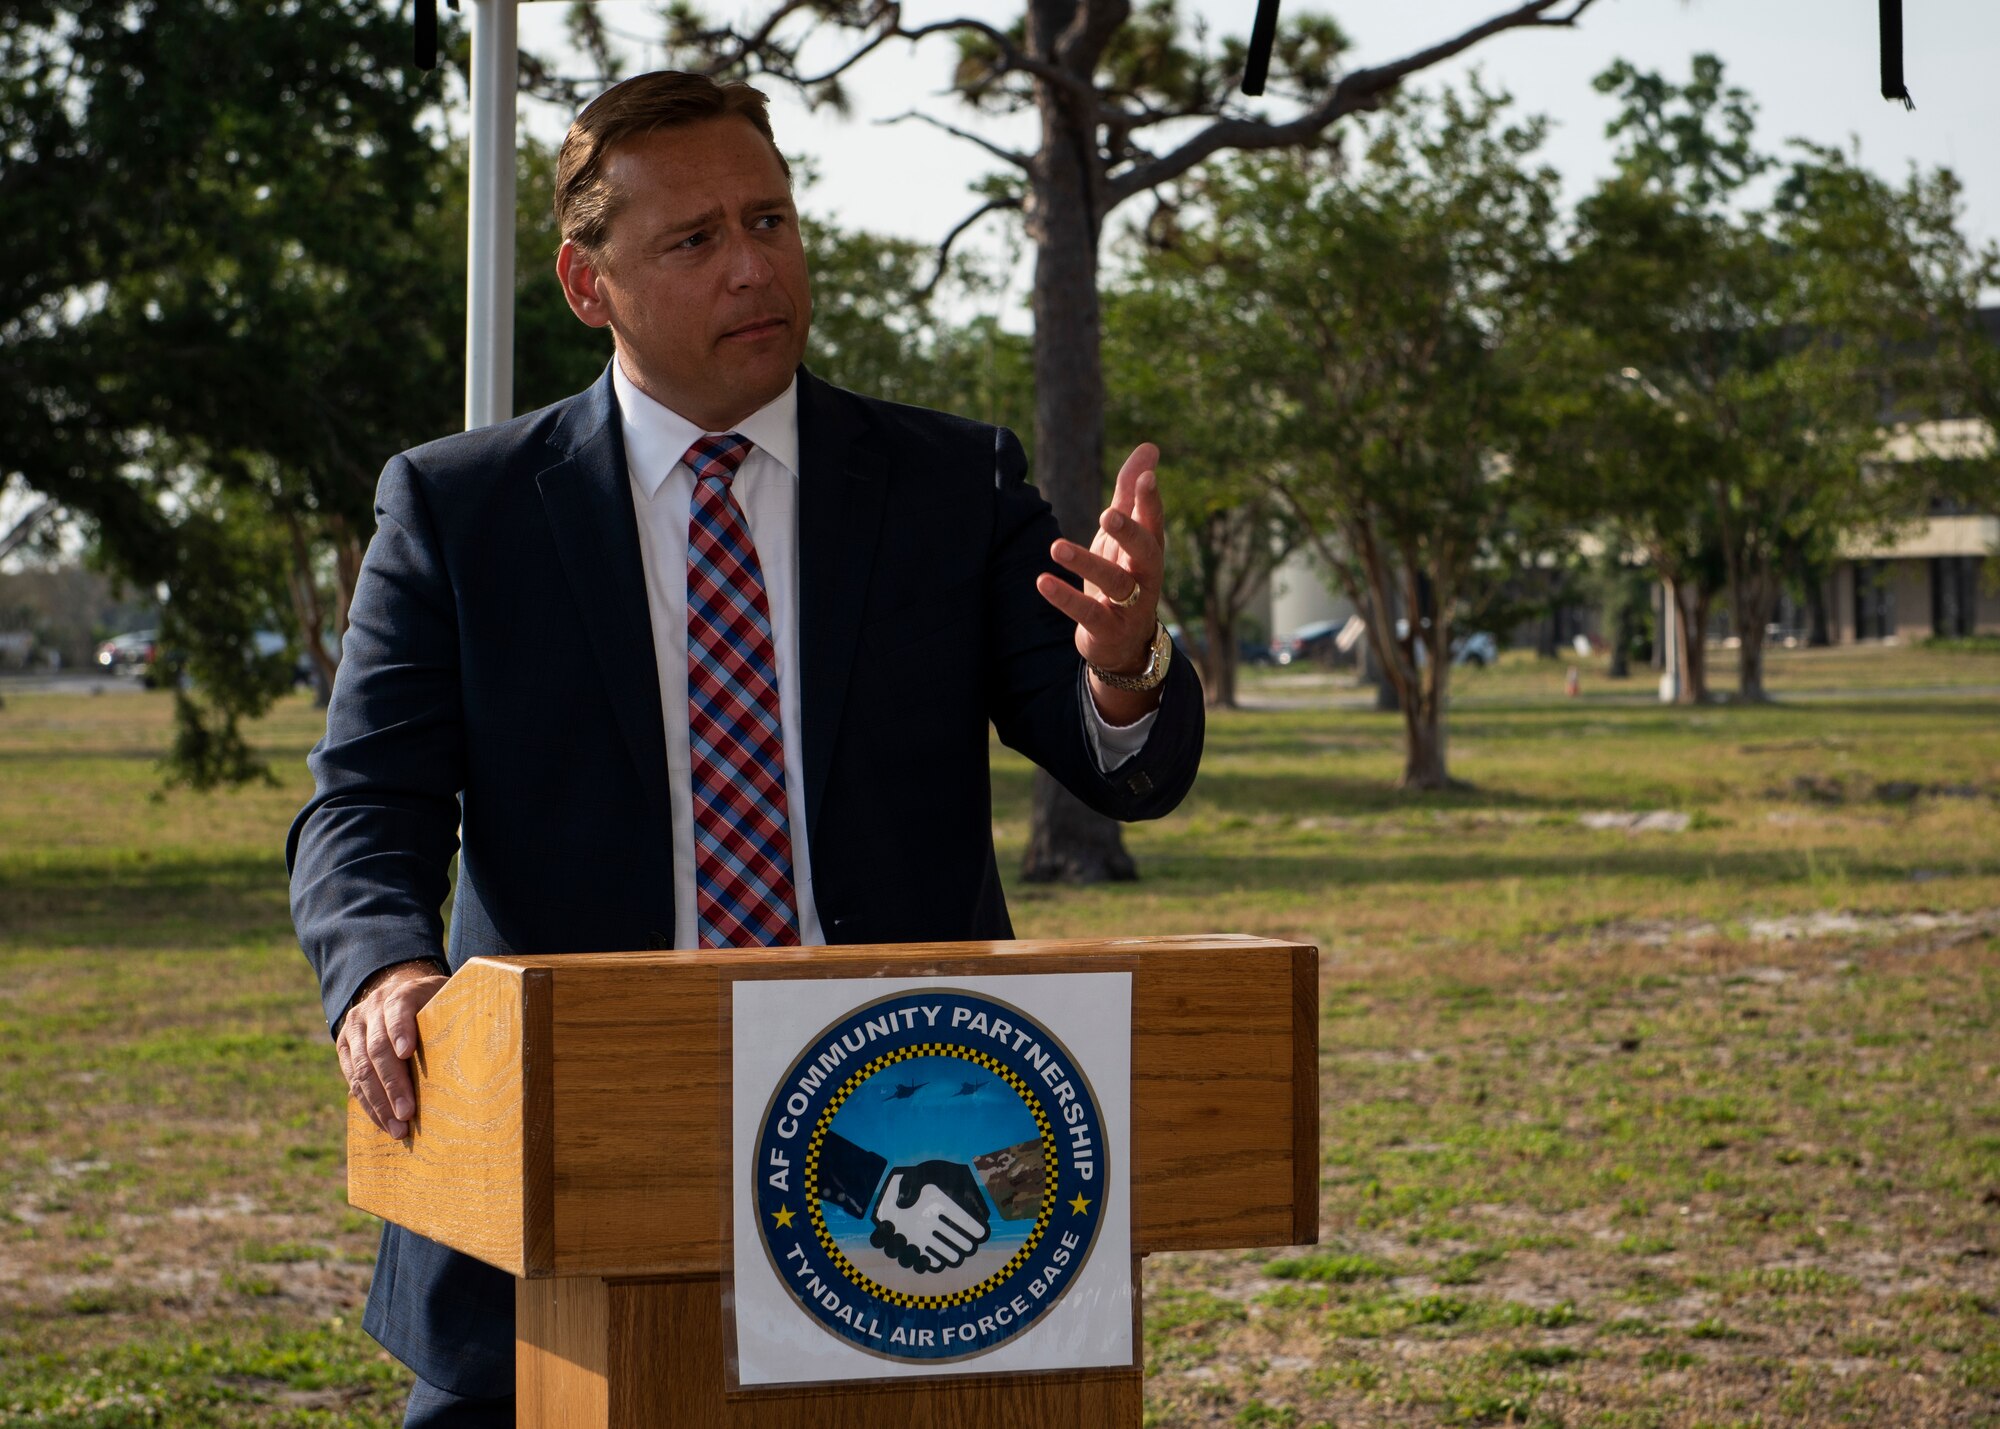 Chuck Purdue, Bay County tax collector, talks to base officials June 3, 2019, about the benefits of an agreement between Tyndall AFB, Florida, and the Bay County Tax Collector's Office  to bring a tax collector office to base. This is just one of many partnerships that benefits both the installation and the local community. (U.S. Air Force photo by Airman 1st Class Bailee A. Darbasie)